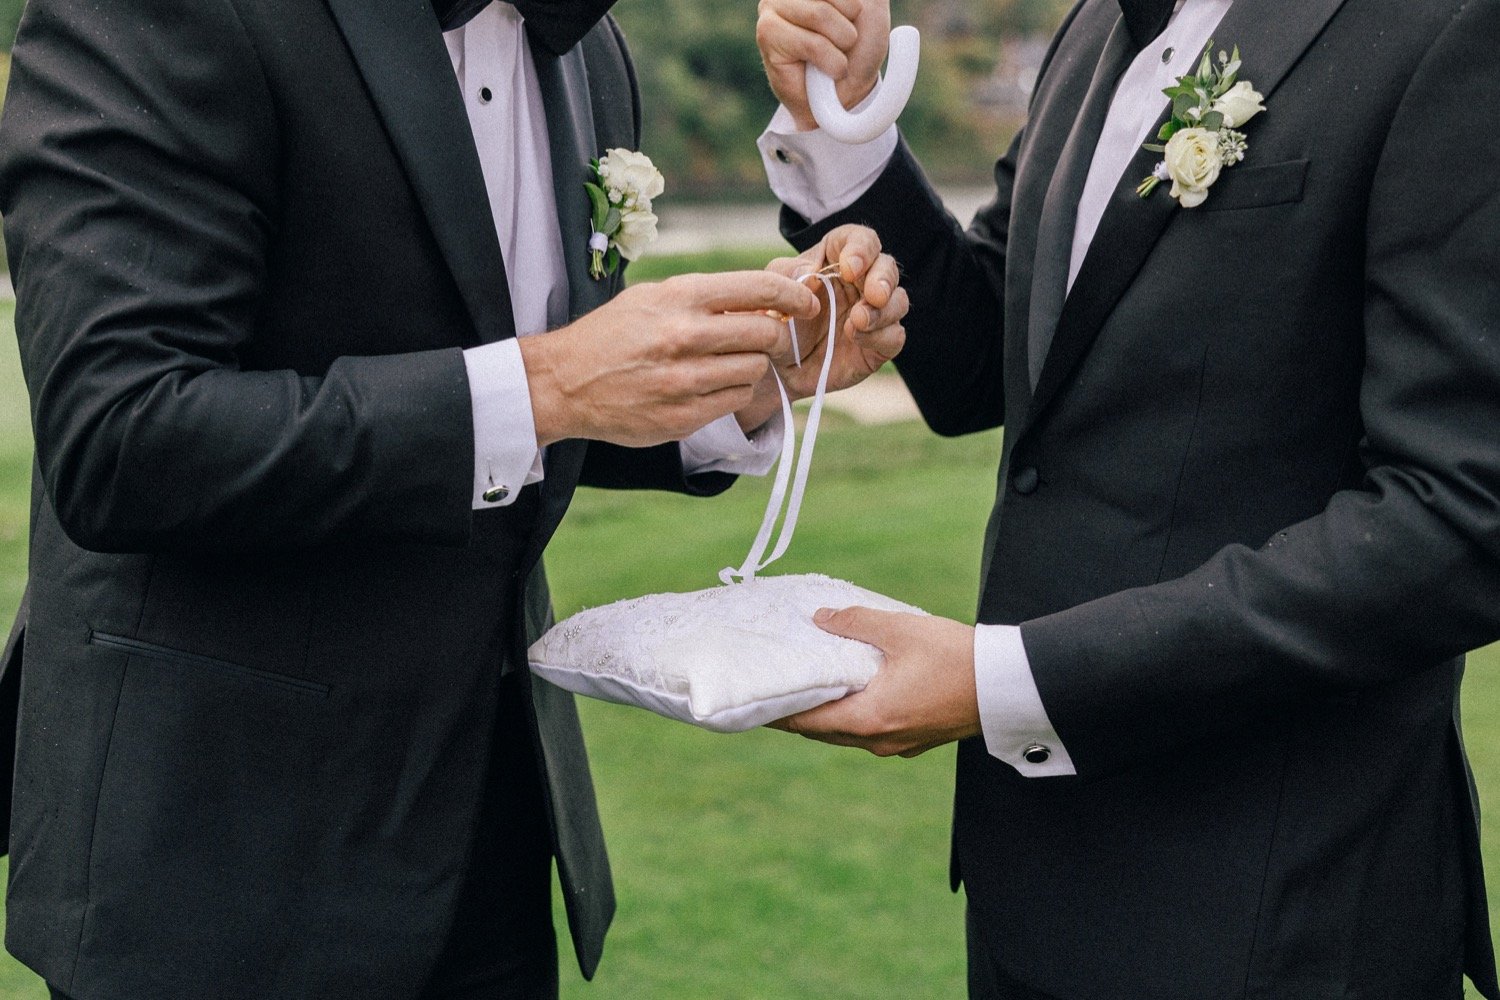  Man’s hands untie wedding bands from white pillow 